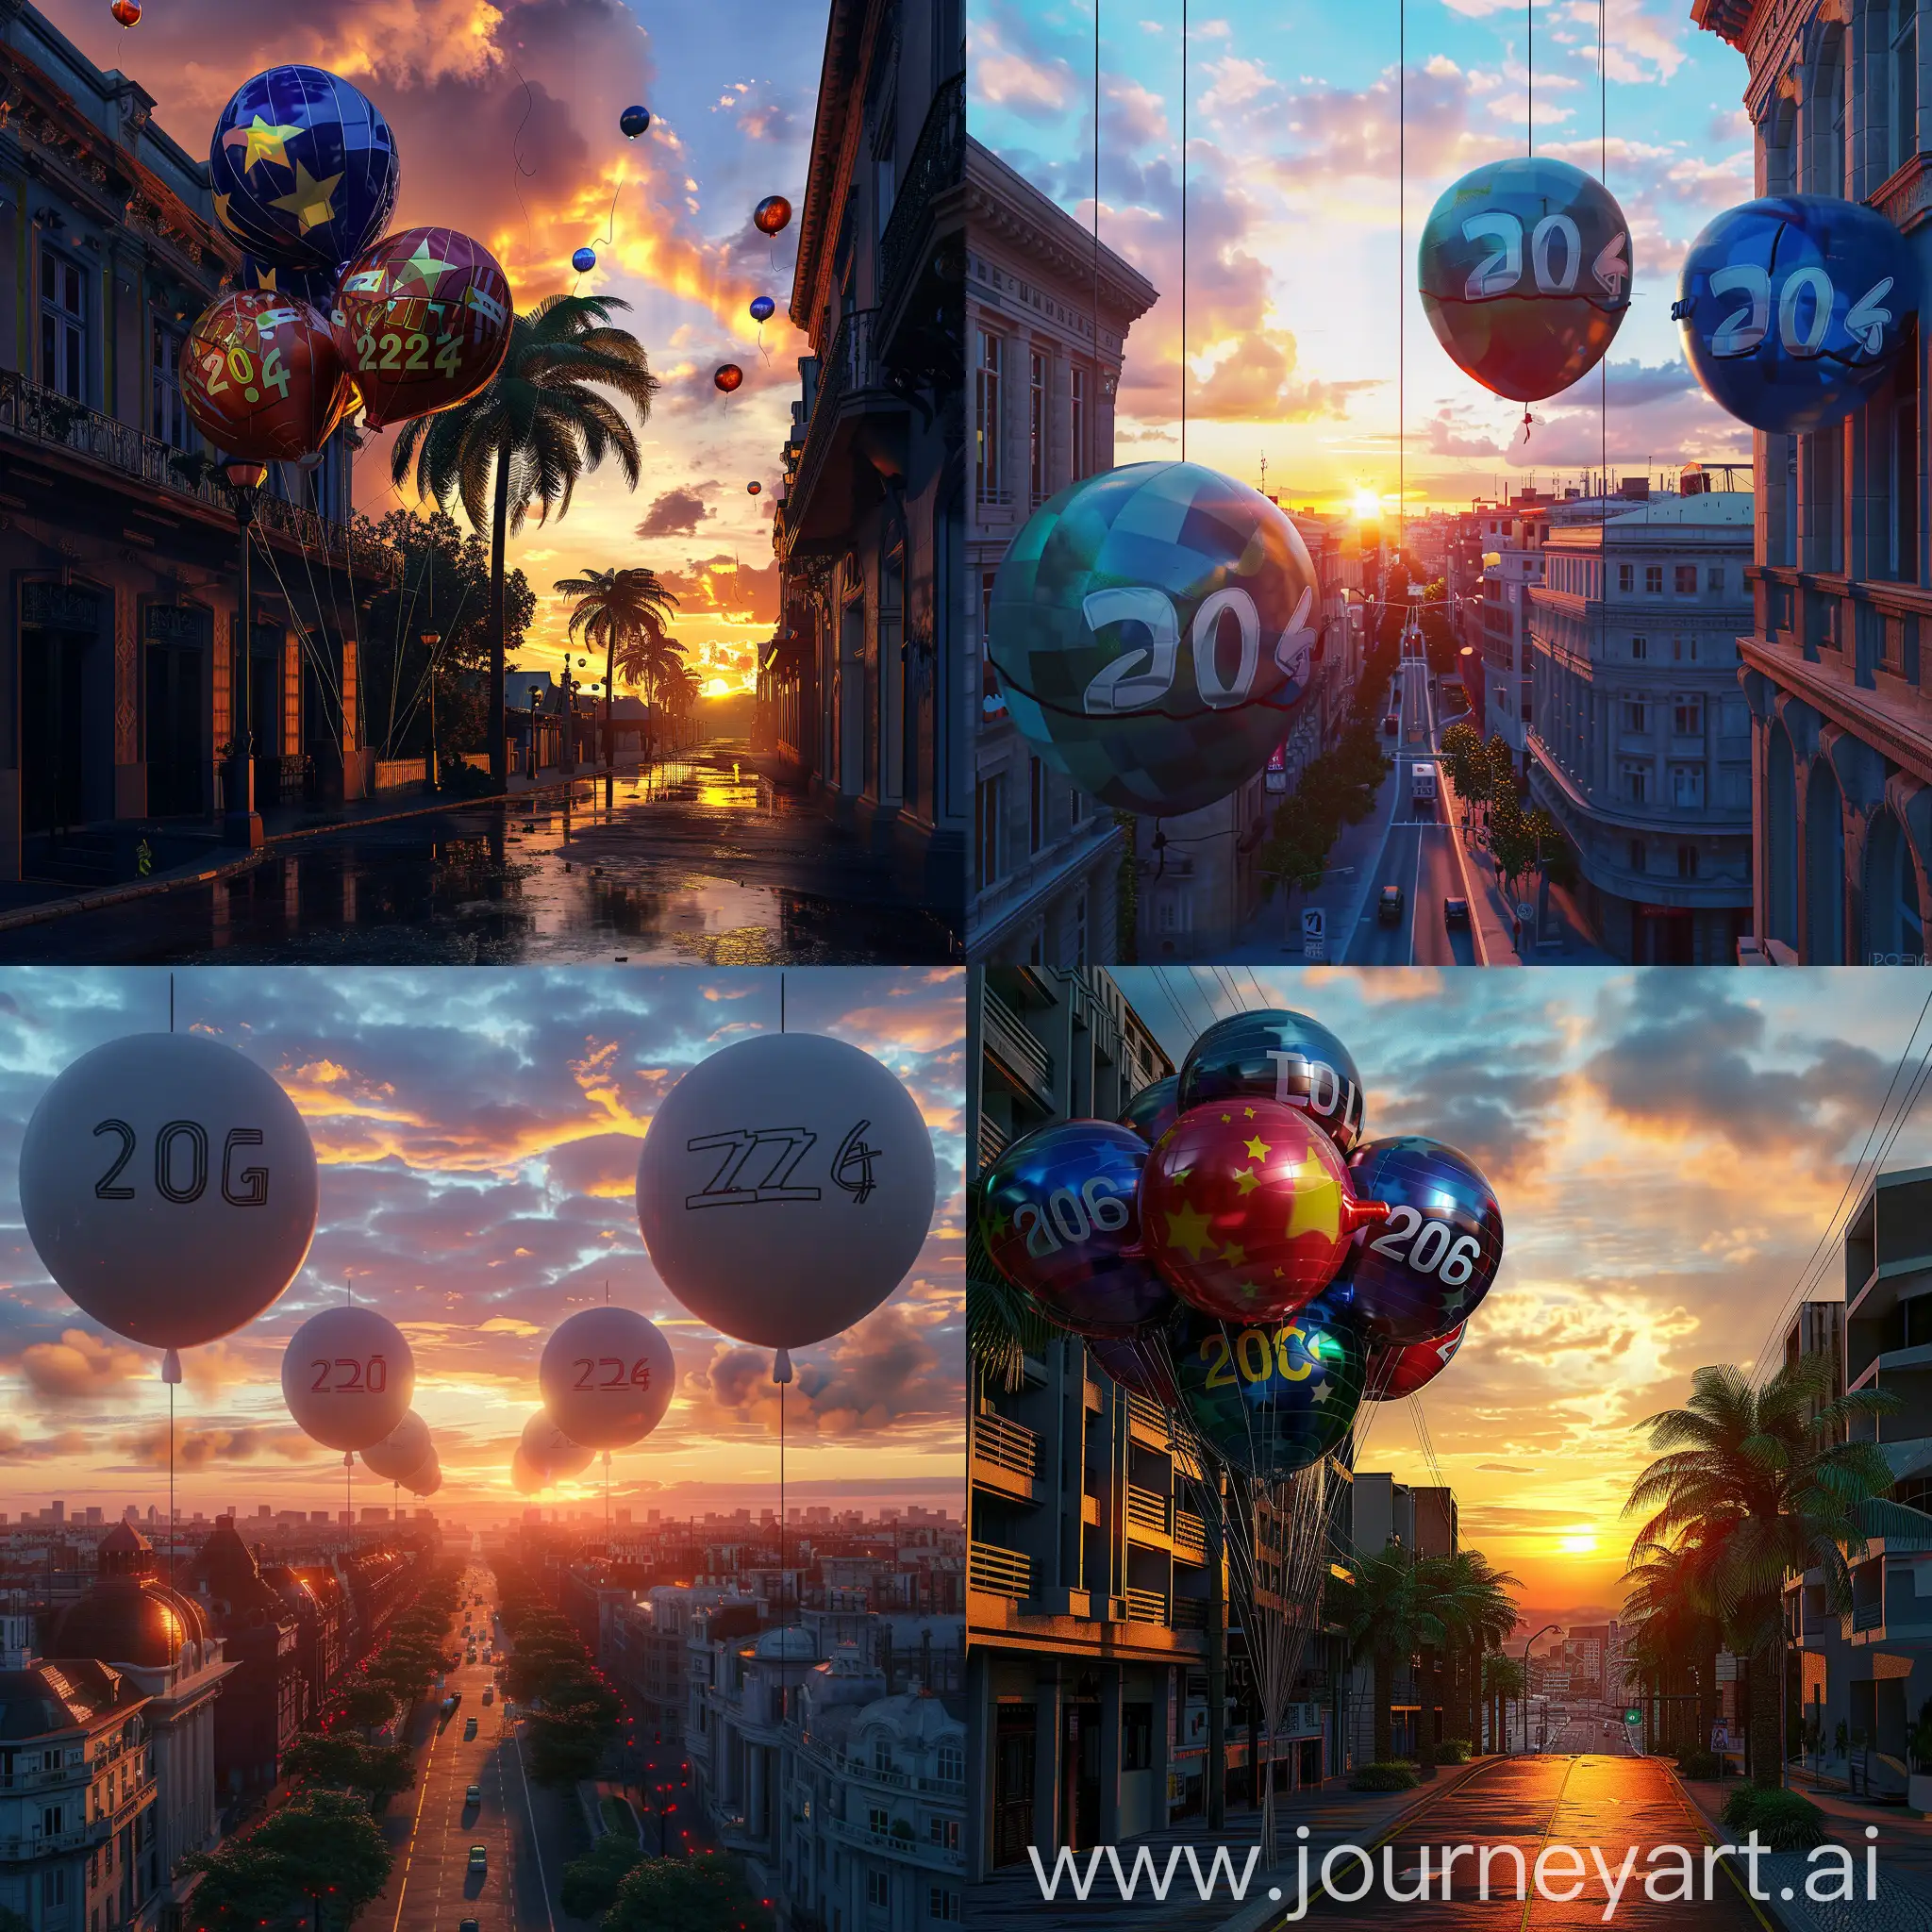 2024-Political-Election-Sunset-Street-View-with-Balloons